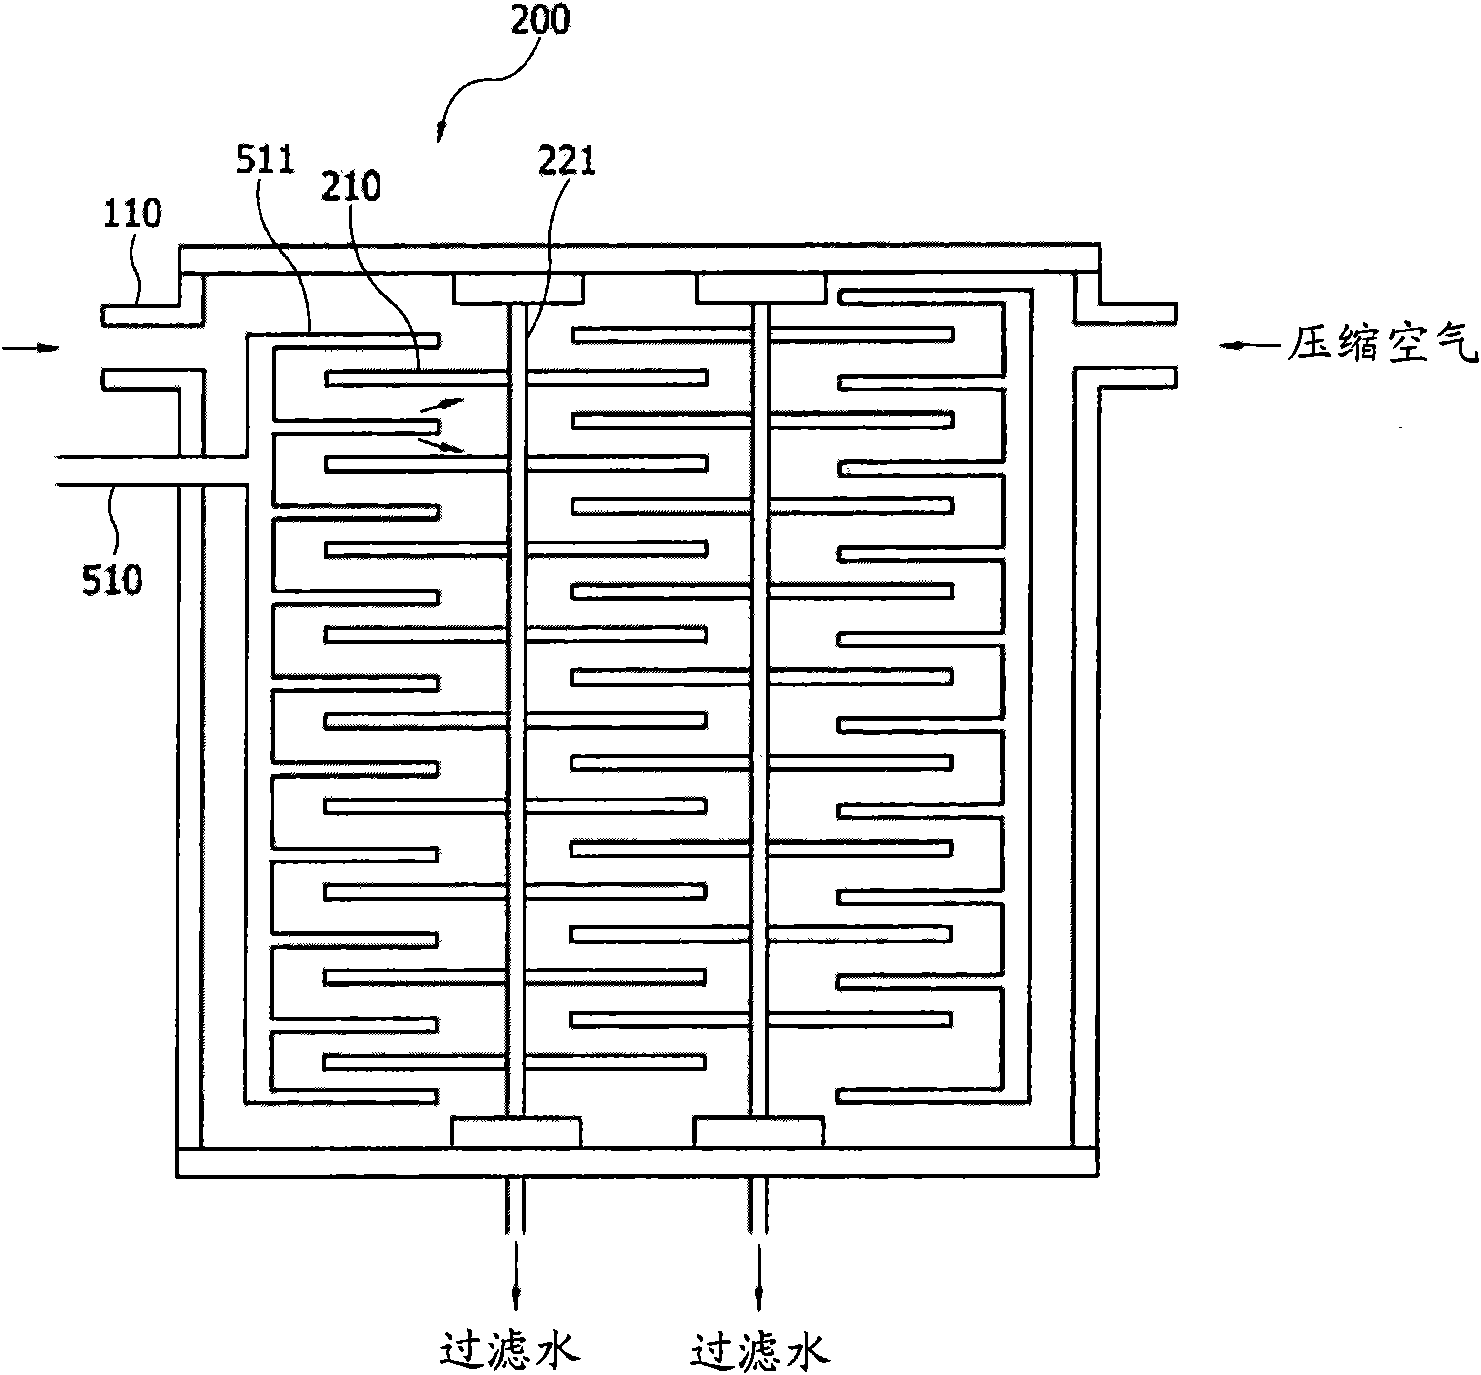 Filter having function of self cleaning and self cleaning method thereof